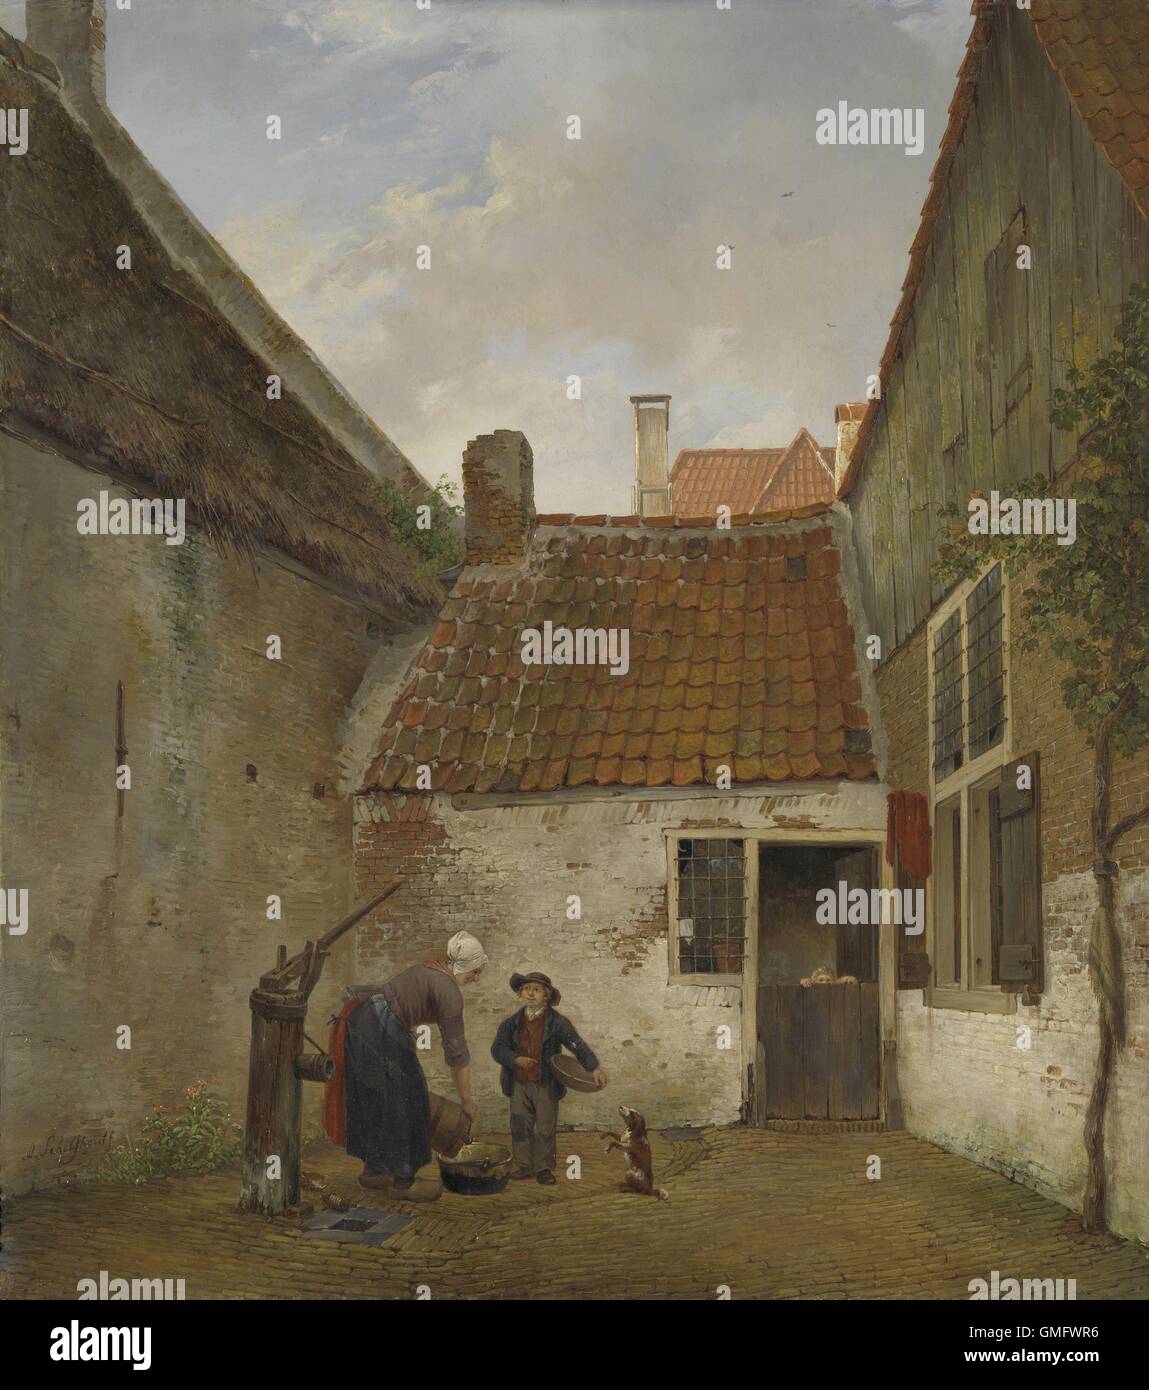 Inner Courtyard, by Andreas Schelfhout, 1820-30, Dutch painting, oil on panel. A woman fills a kettle with water from brick paved courtyard pump. She is engaged with a boy and dog as a small child looks over the half opened Dutch door. (BSLOC_2016_1_72) Stock Photo